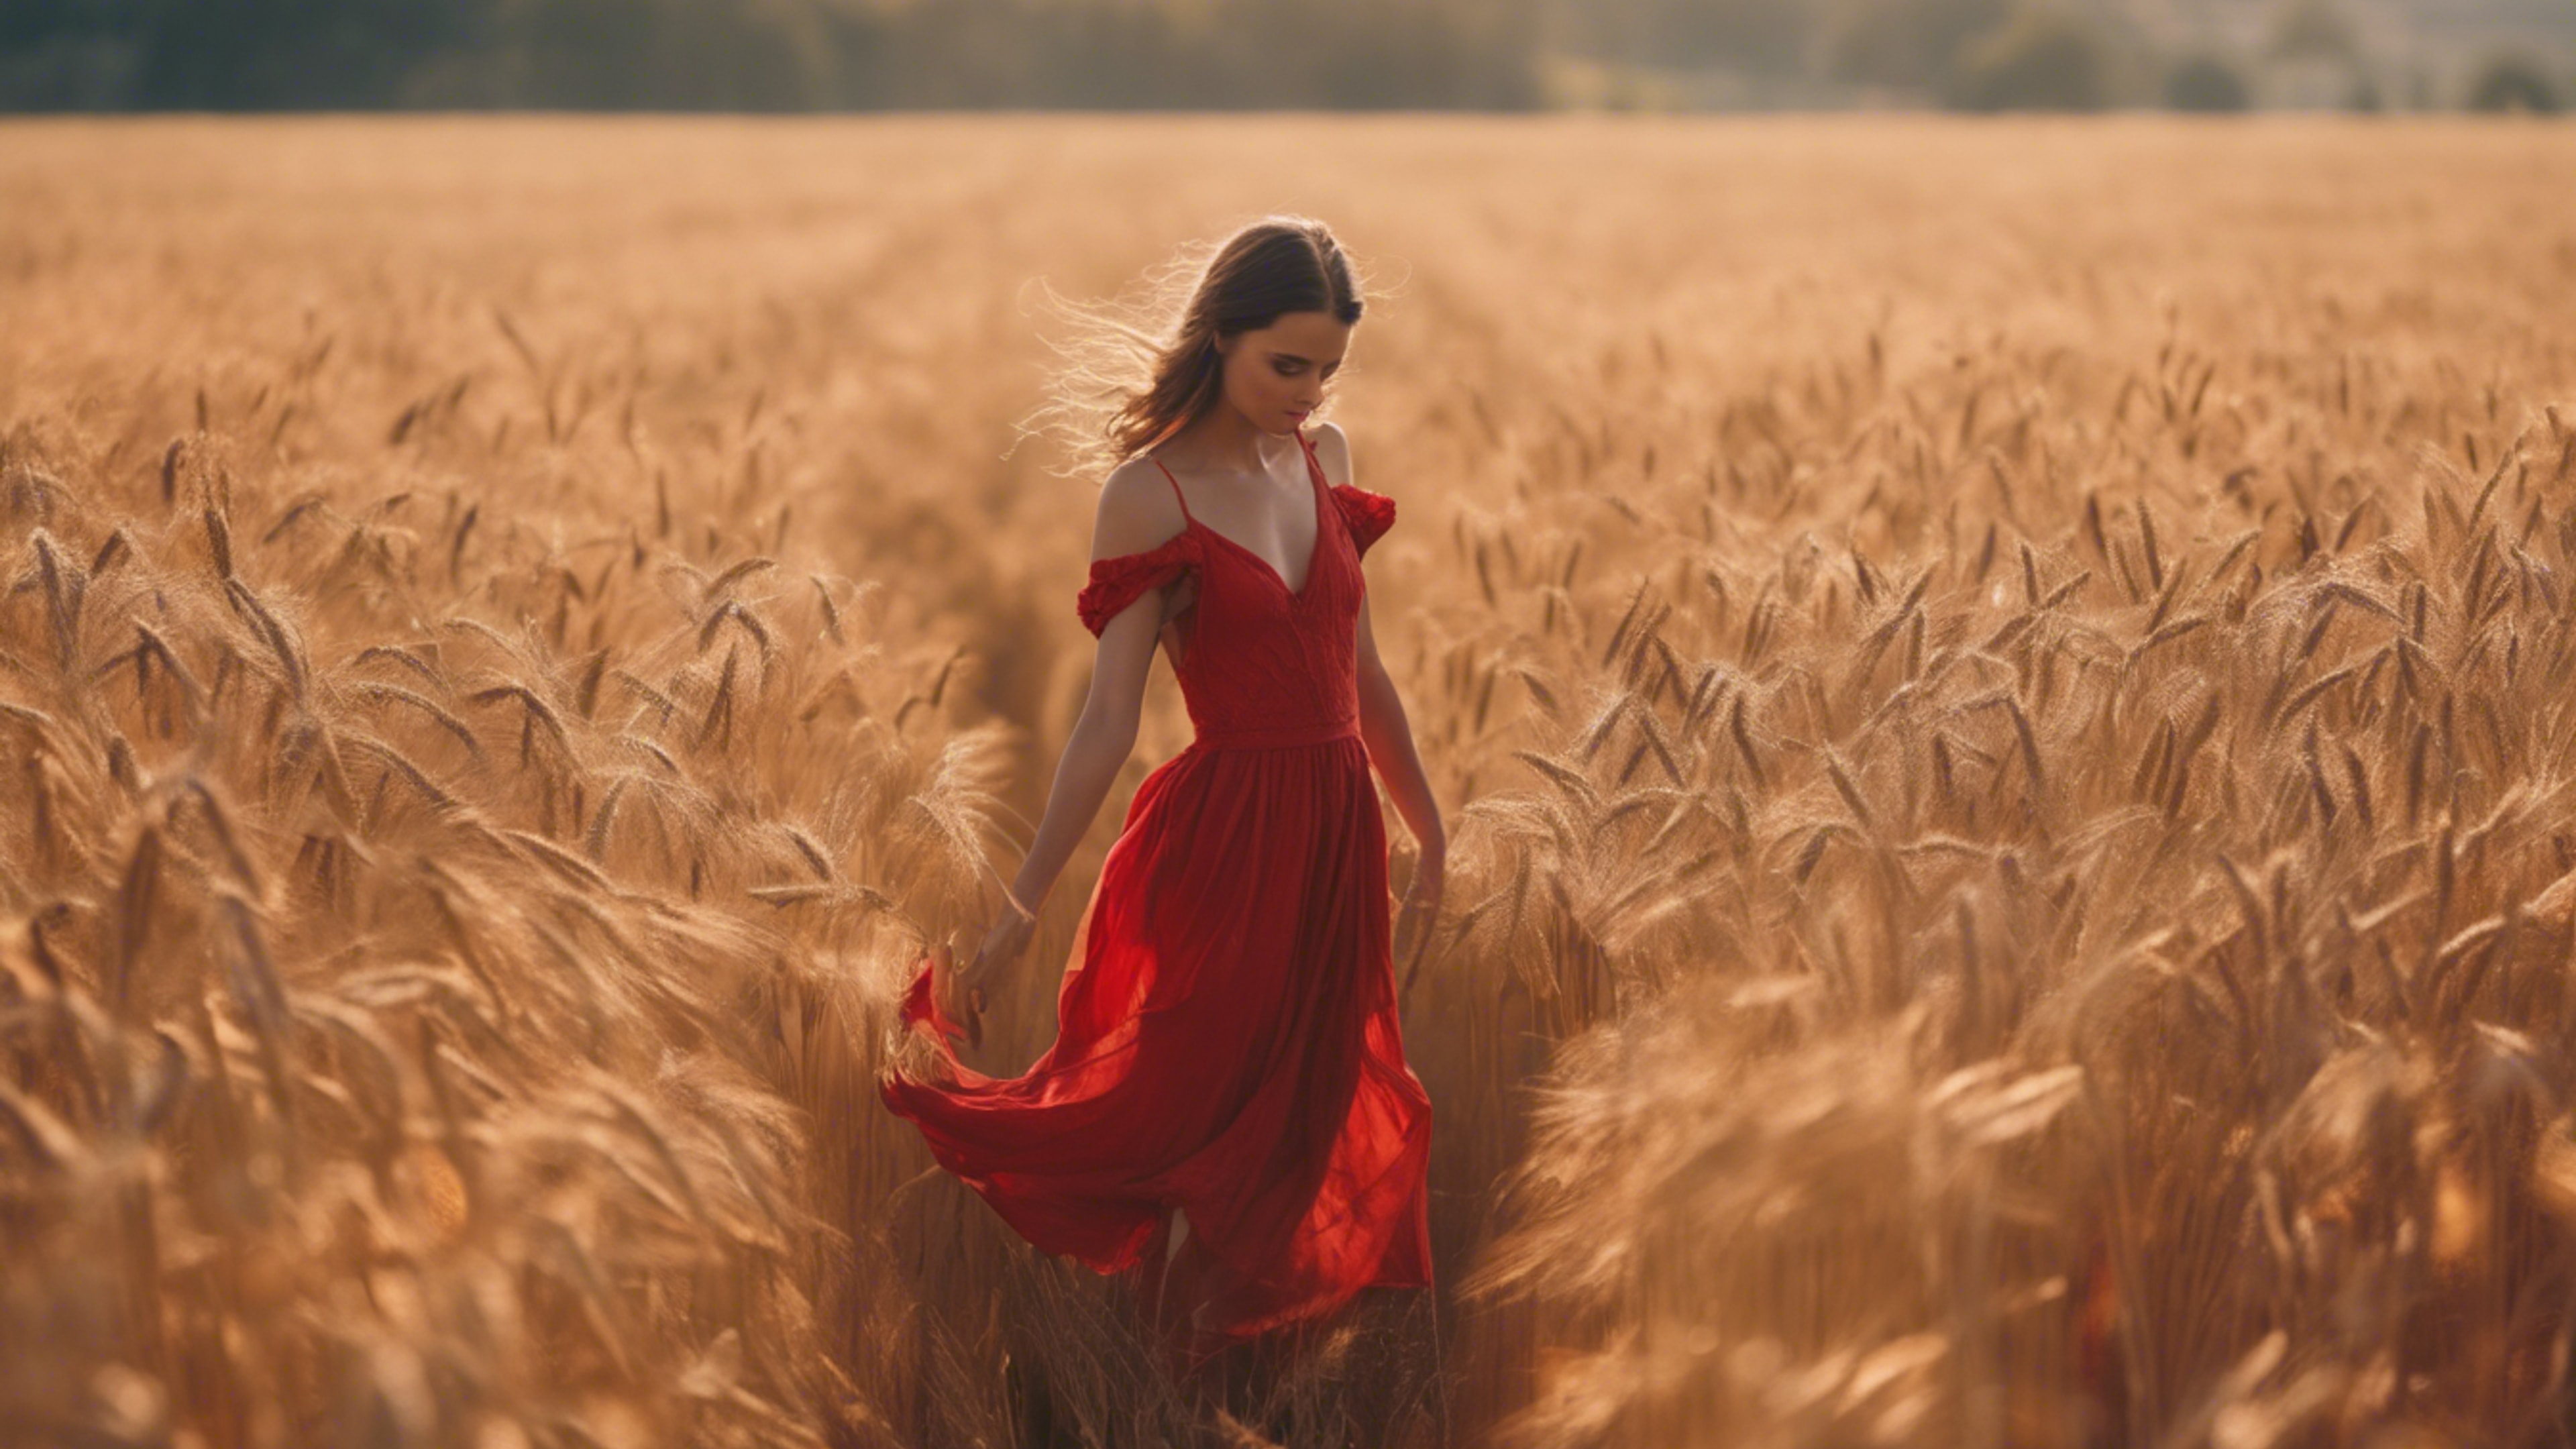 A young girl in a fiery red dress dancing in a golden wheat field. Tapetai[3d2bbc59672c41dea075]